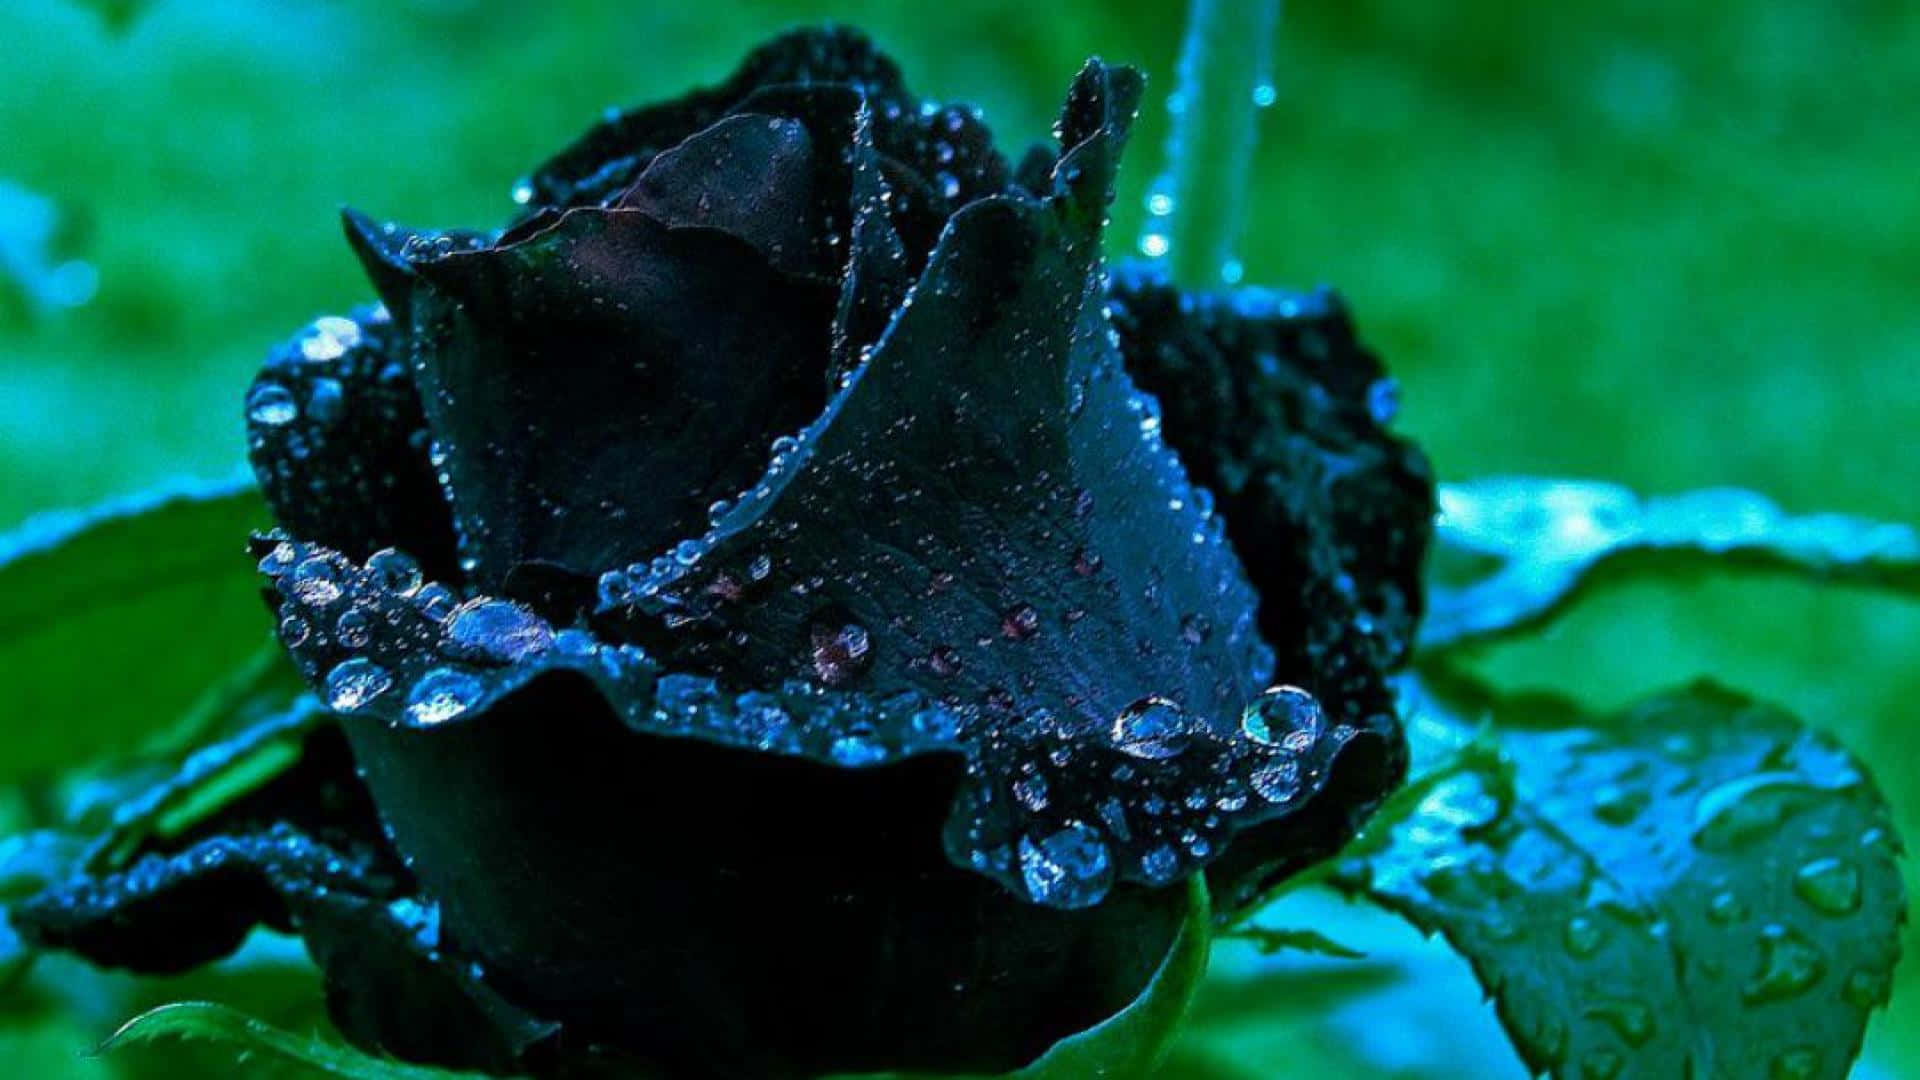 Soft and delicate, the Black Rose offers a mysterious beauty